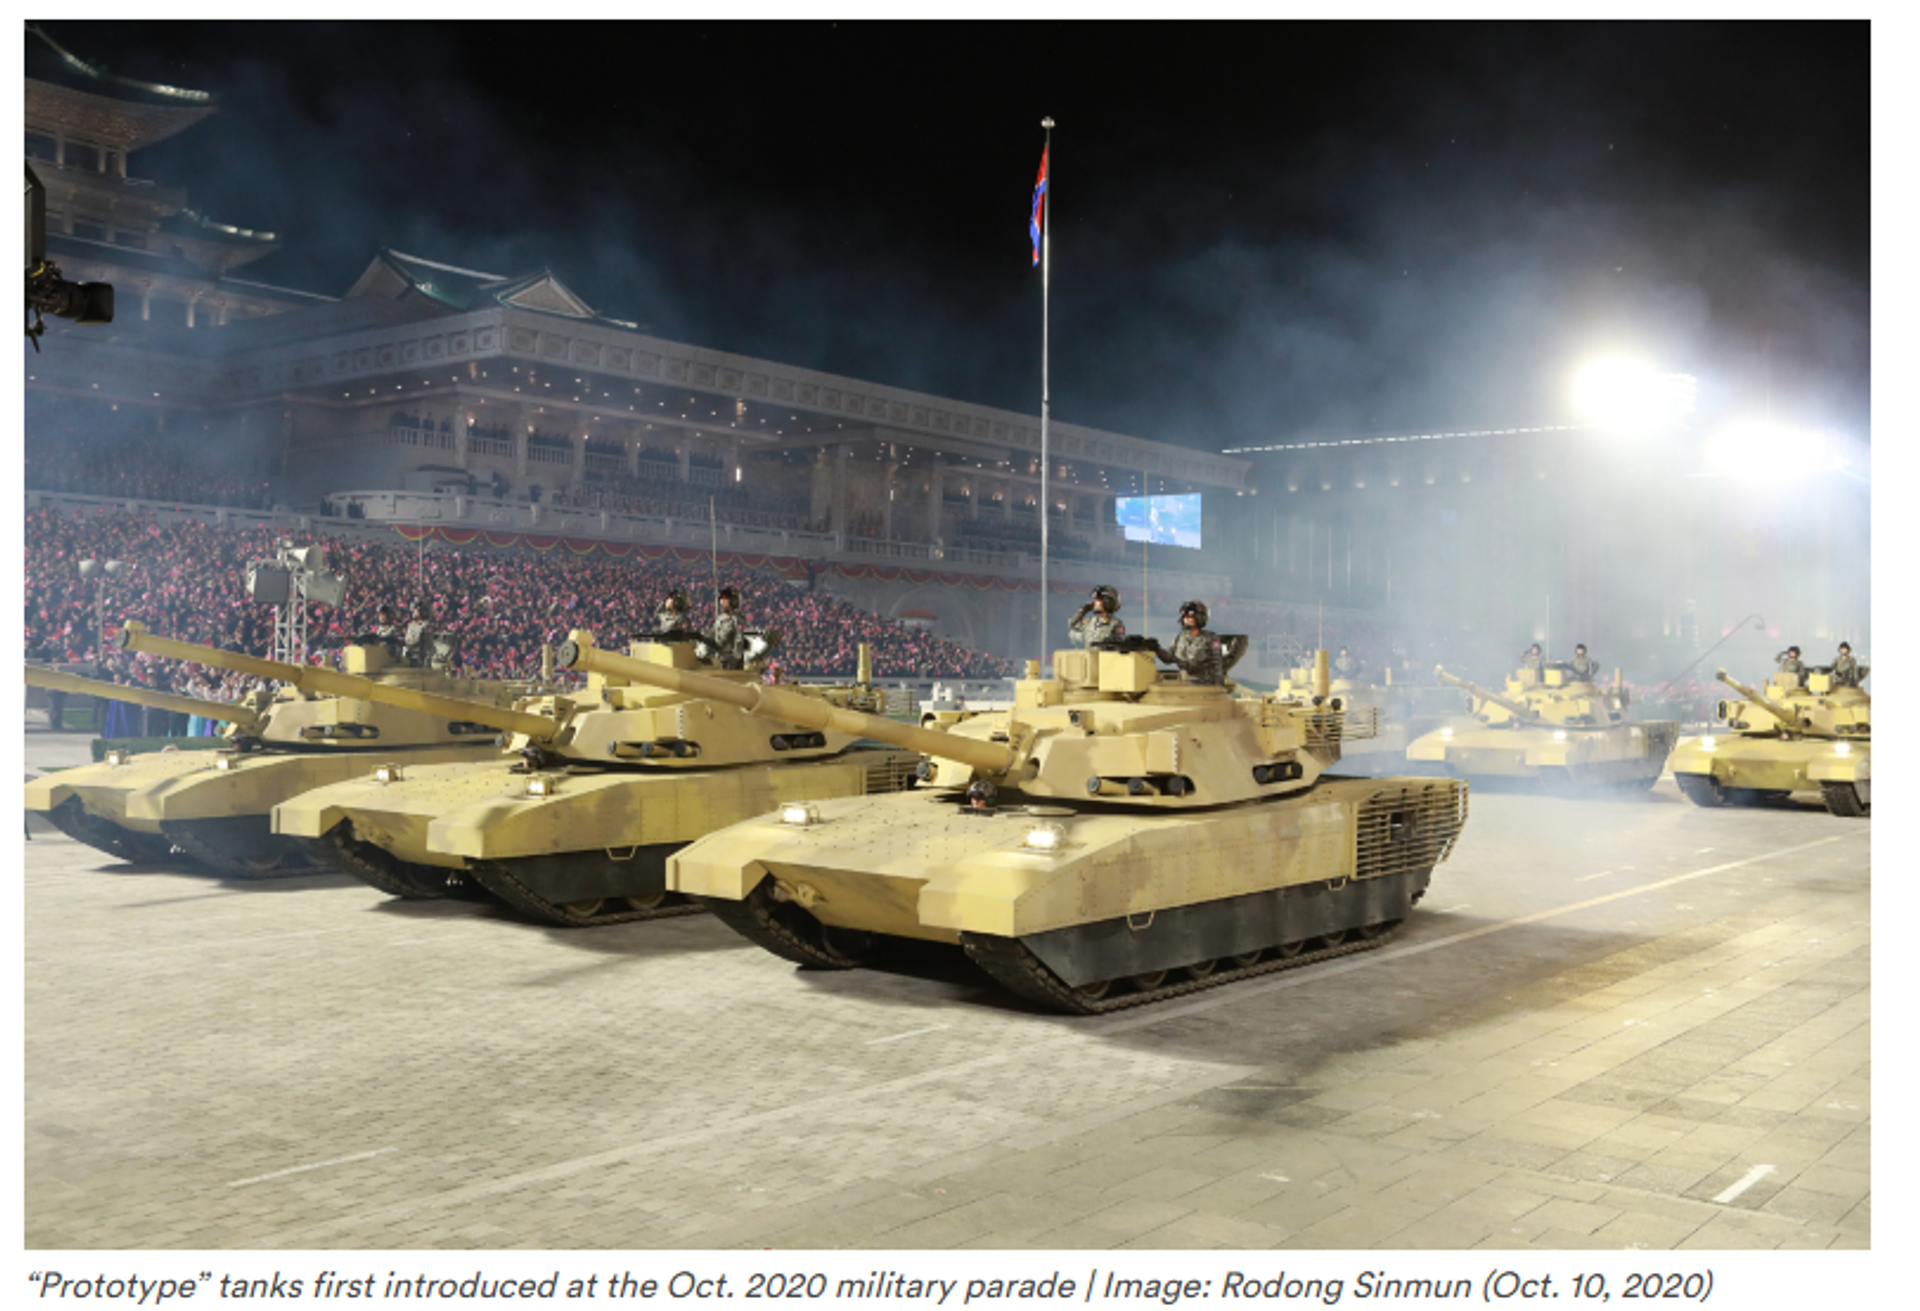 Screengrab of “Prototype” tanks first introduced at the military parade in North Korea on October 10, 2020. - Sputnik International, 1920, 08.08.2023